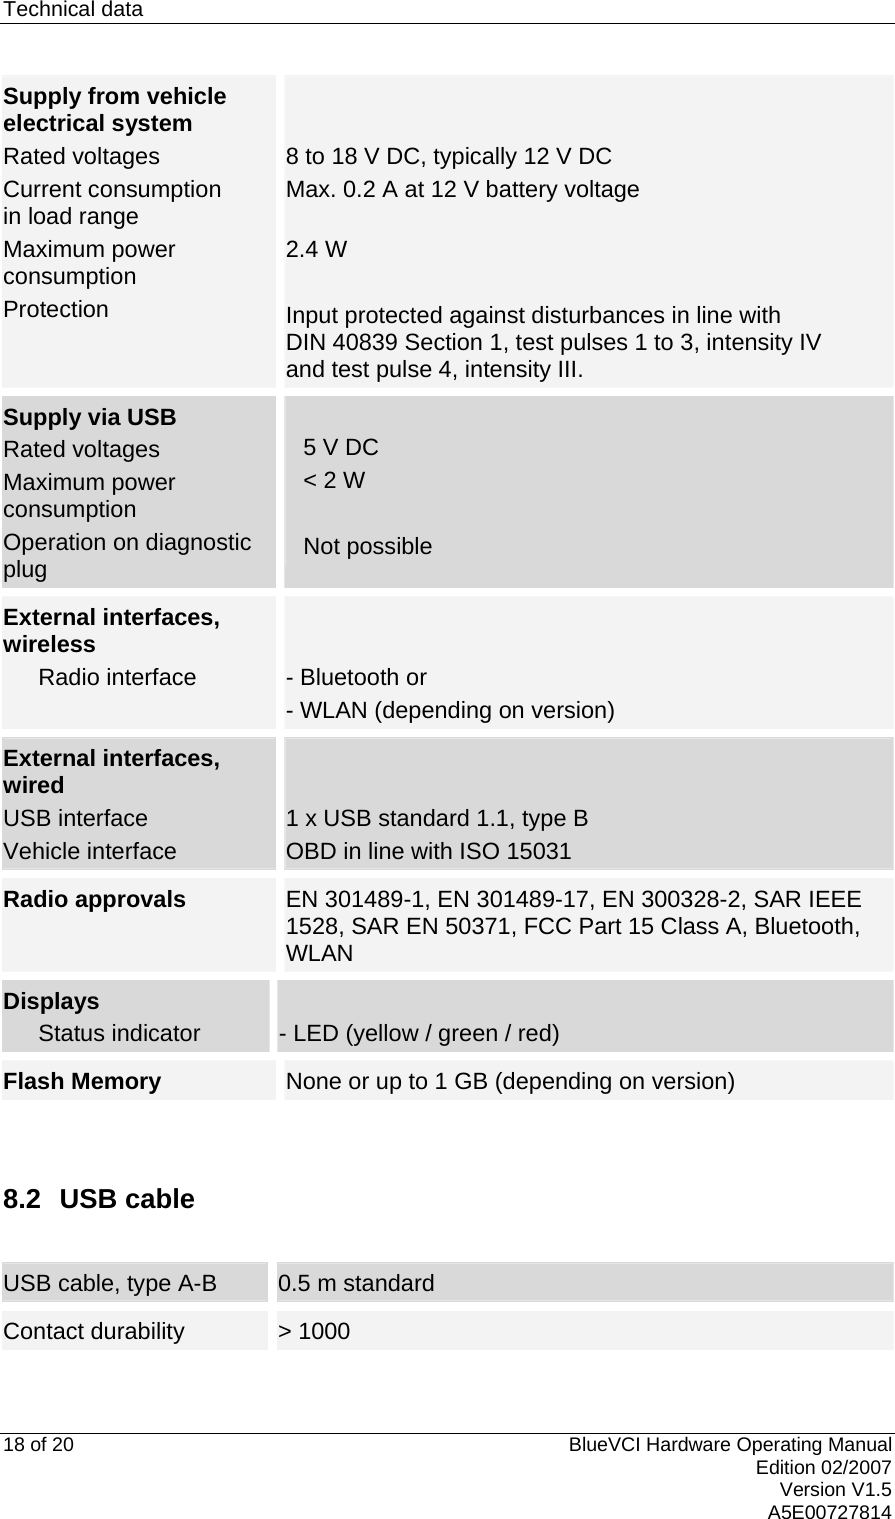 Technical data  18 of 20  BlueVCI Hardware Operating Manual Edition 02/2007 Version V1.5 A5E00727814 Supply from vehicle electrical system Rated voltages Current consumption  in load range Maximum power consumption Protection    8 to 18 V DC, typically 12 V DC Max. 0.2 A at 12 V battery voltage  2.4 W  Input protected against disturbances in line with DIN 40839 Section 1, test pulses 1 to 3, intensity IV  and test pulse 4, intensity III. Supply via USB  Rated voltages Maximum power consumption Operation on diagnostic plug  5 V DC &lt; 2 W  Not possible External interfaces,  wireless  Radio interface    - Bluetooth or - WLAN (depending on version) External interfaces,  wired USB interface Vehicle interface   1 x USB standard 1.1, type B OBD in line with ISO 15031 Radio approvals  EN 301489-1, EN 301489-17, EN 300328-2, SAR IEEE 1528, SAR EN 50371, FCC Part 15 Class A, Bluetooth, WLAN Displays  Status indicator  - LED (yellow / green / red) Flash Memory  None or up to 1 GB (depending on version)  8.2 USB cable   USB cable, type A-B  0.5 m standard Contact durability  &gt; 1000 